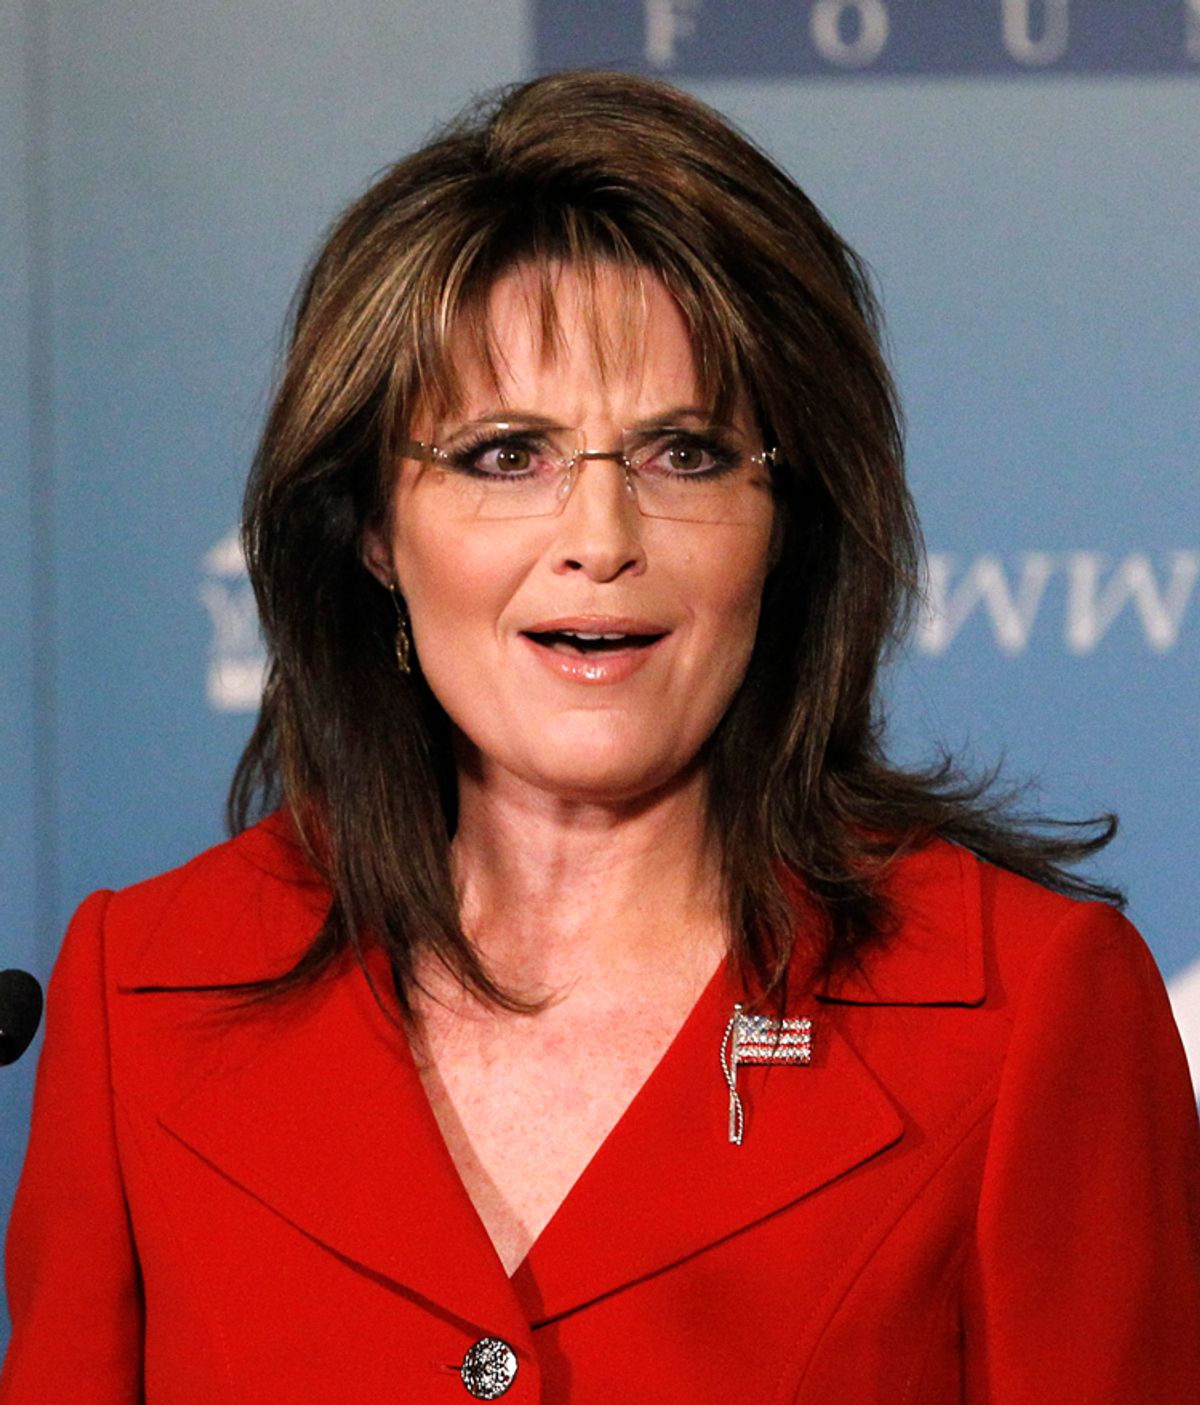 Former Alaska governor Sarah Palin delivers a keynote speech at the Reagan 100 opening banquet at Reagan Ranch Center in Santa Barbara, California February 4, 2011. The event celebrates the 100th anniversary of former U.S. President Ronald Reagan's birthday.    REUTERS/Mario Anzuoni (UNITED STATES - Tags: POLITICS PROFILE)  (Â© Mario Anzuoni / Reuters)